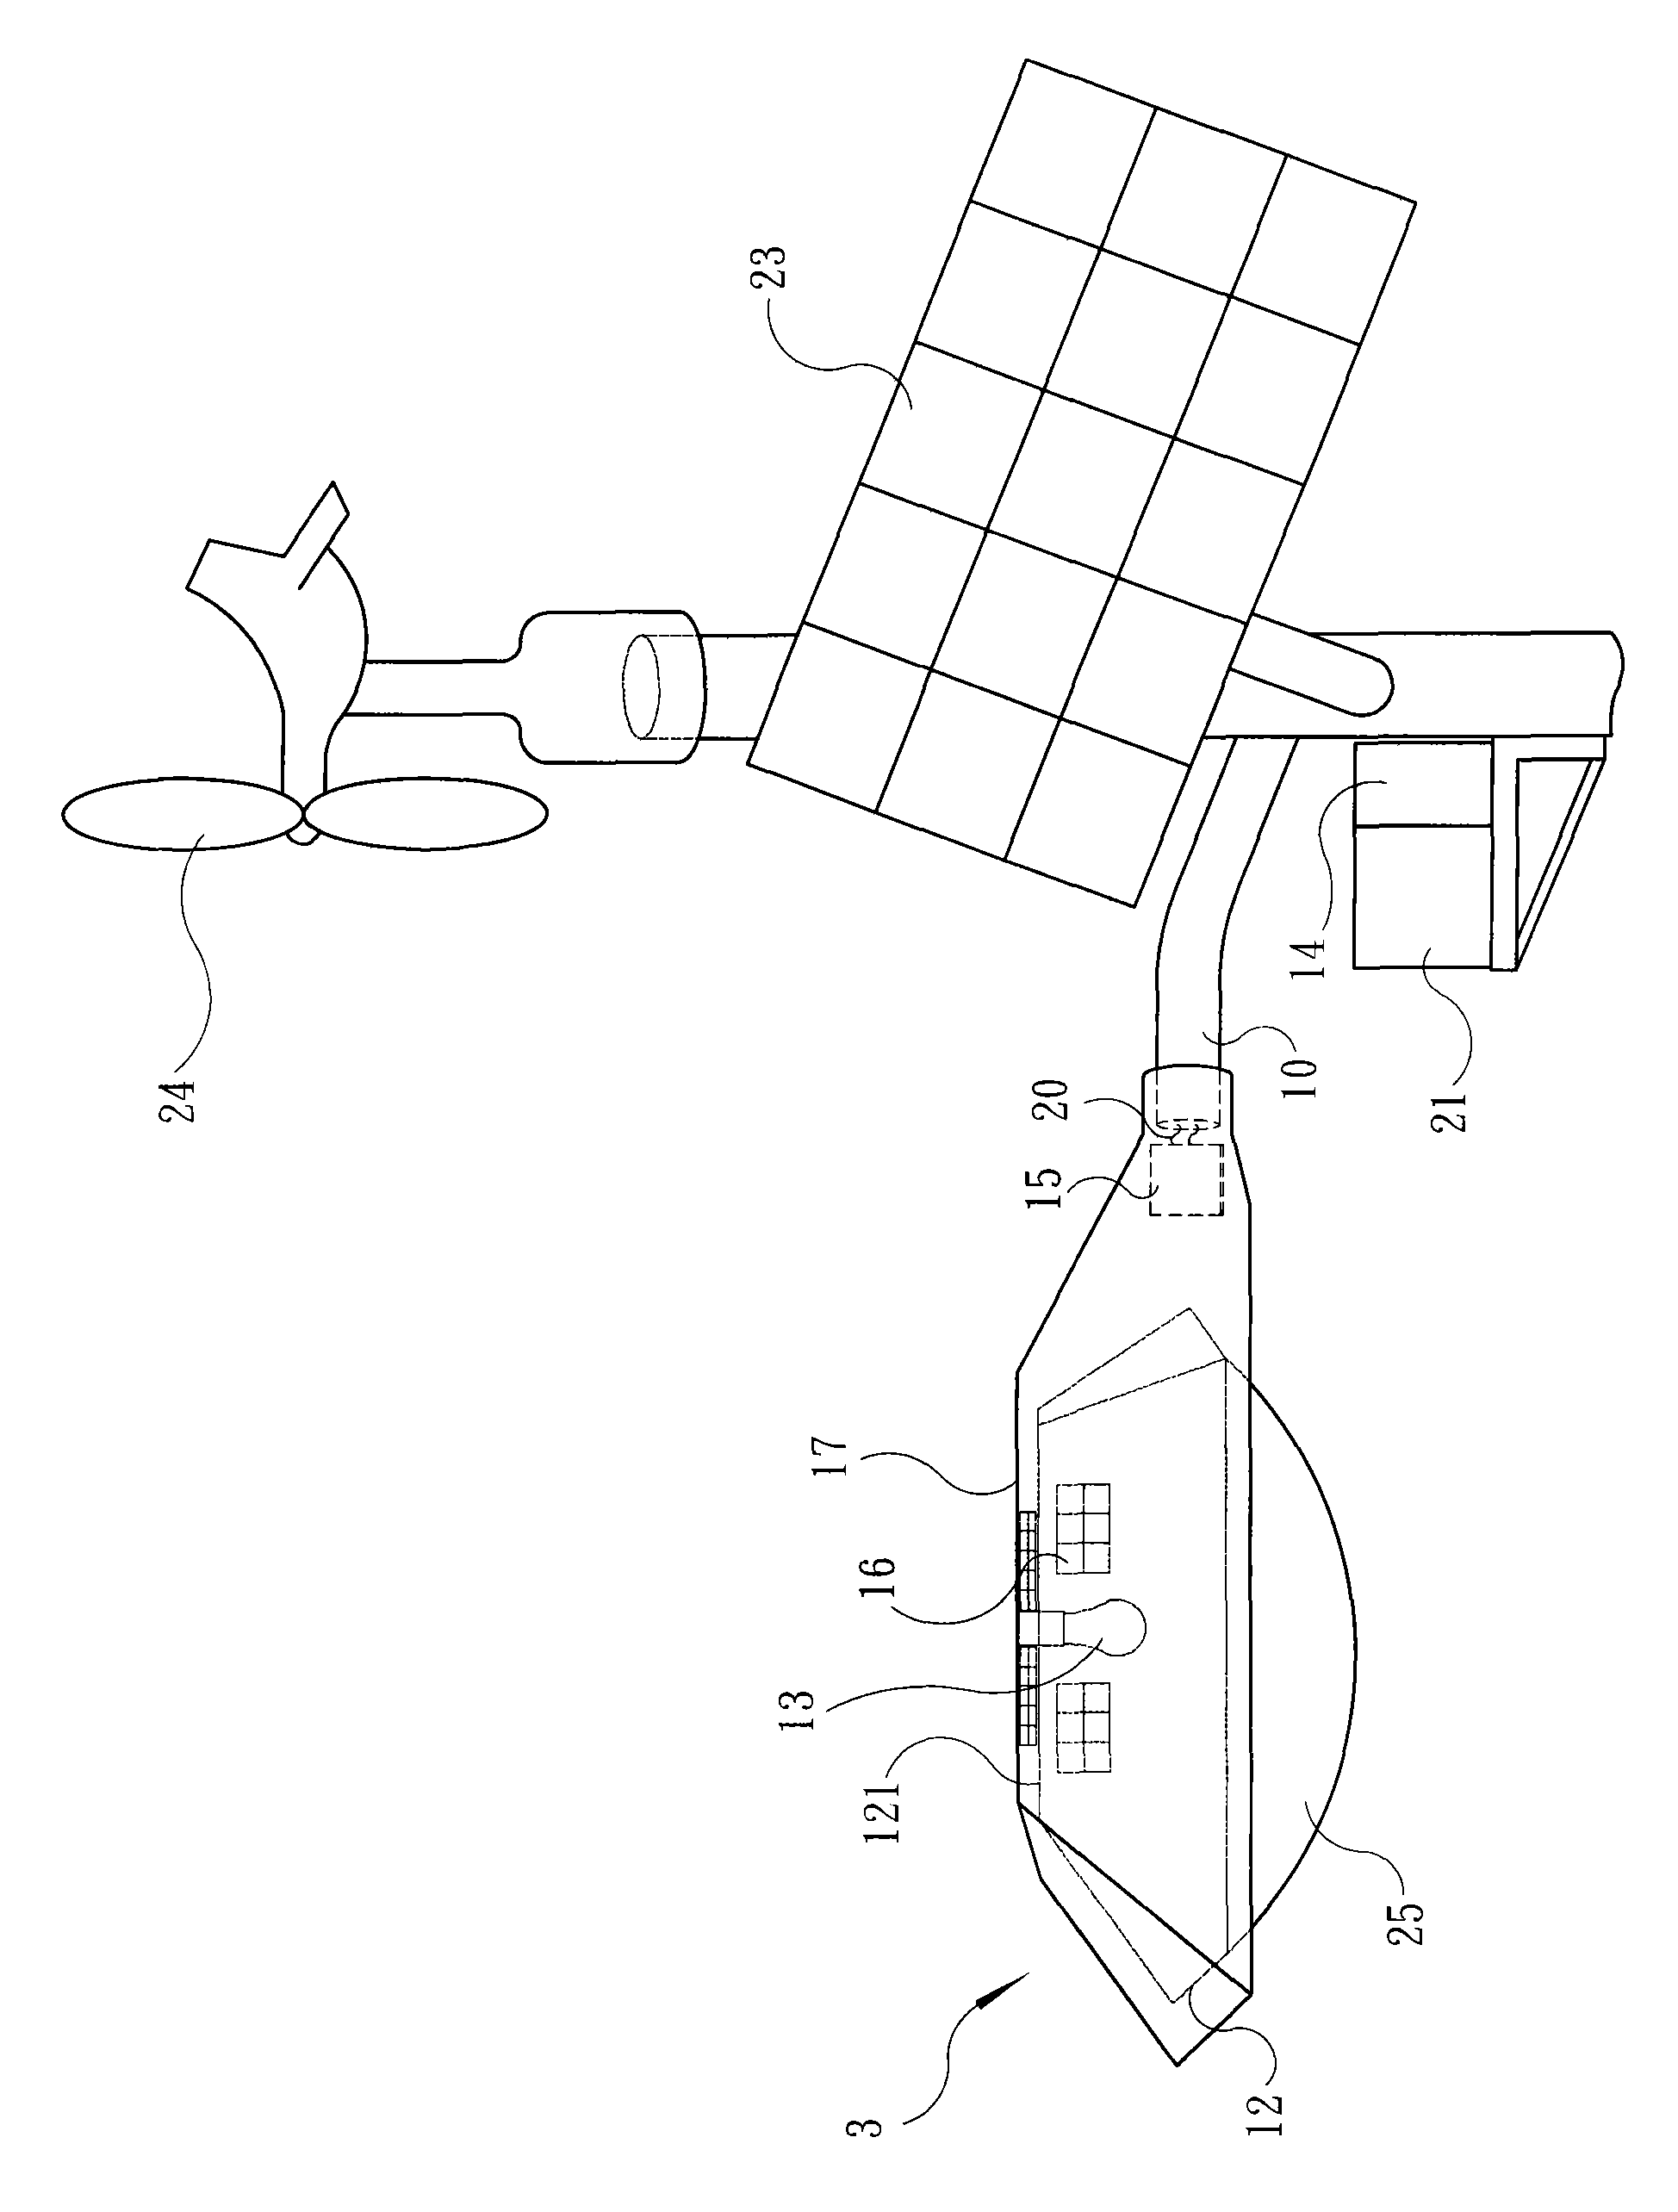 Method and device for recycling and reusing heat energy of lighting facilities